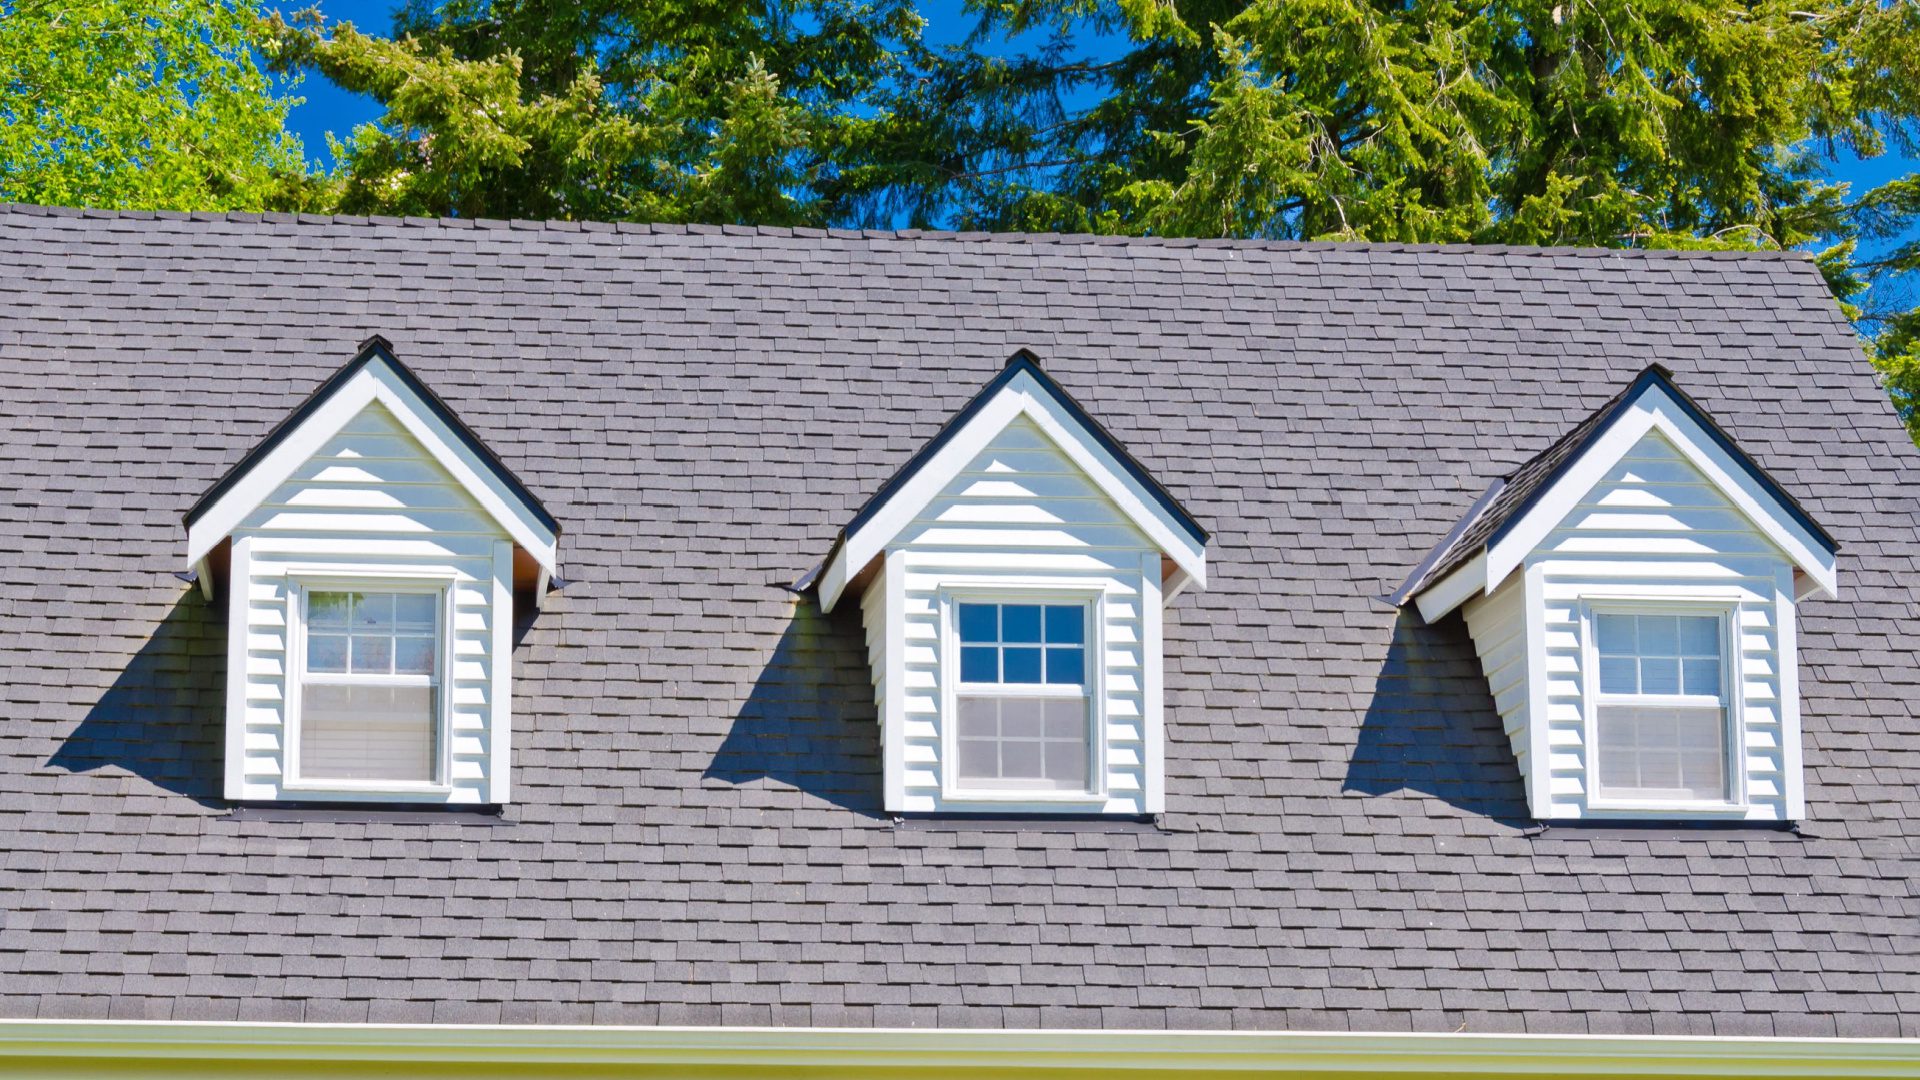 Do 50-Year Shingles Last for 50 Years